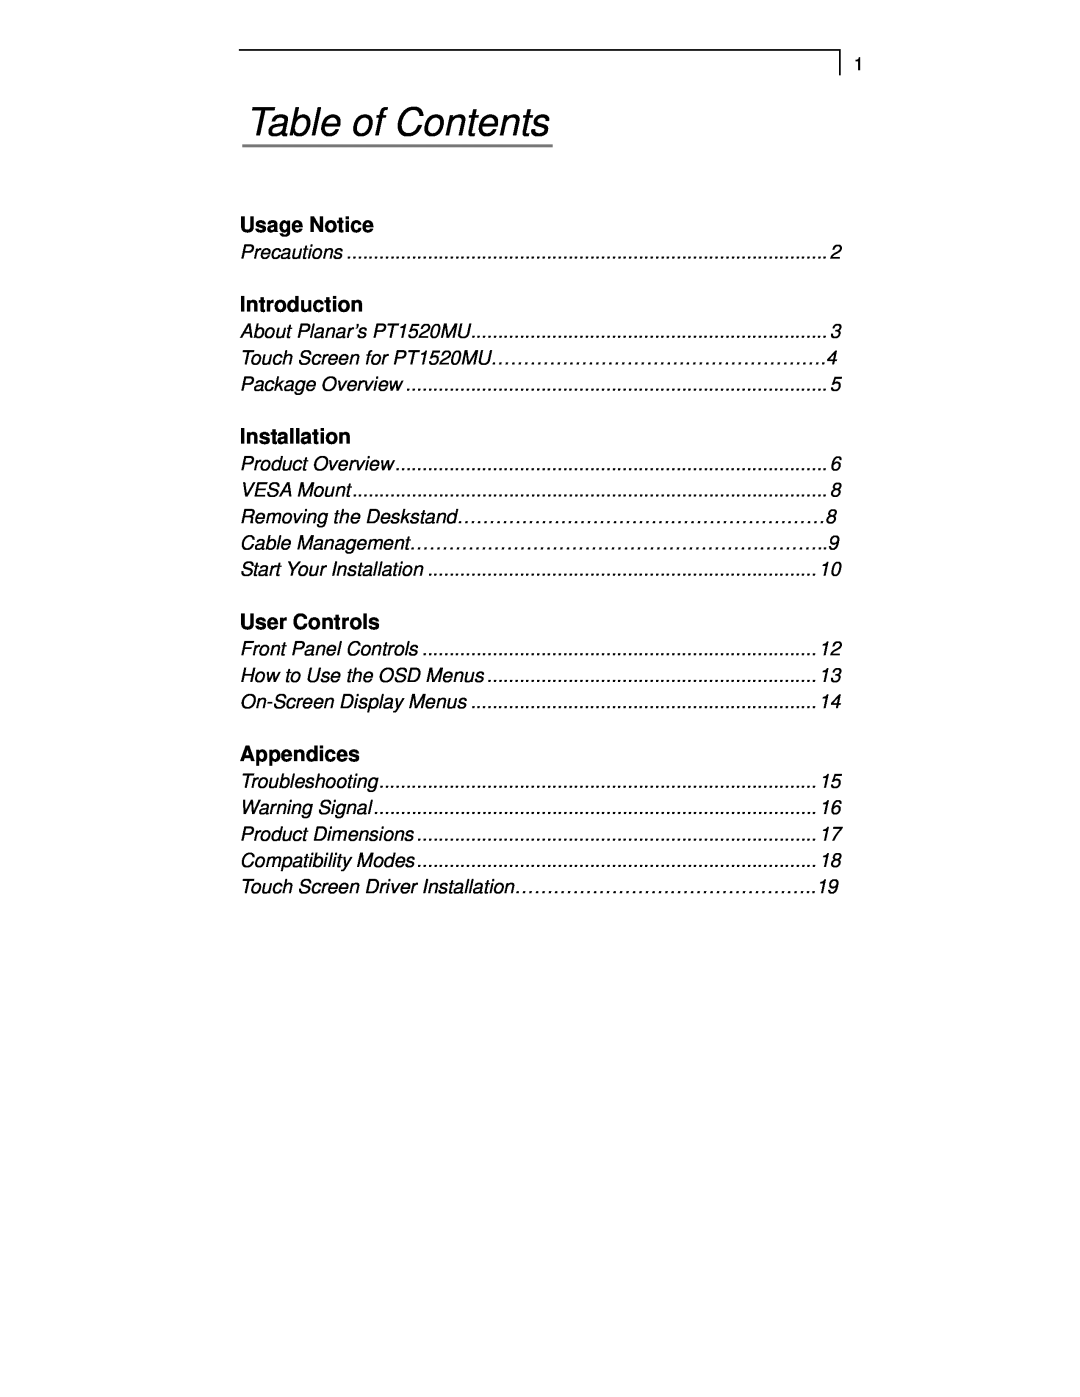 Planar PT1520MU manual Table of Contents, Usage Notice, Introduction, Installation, User Controls, Appendices 